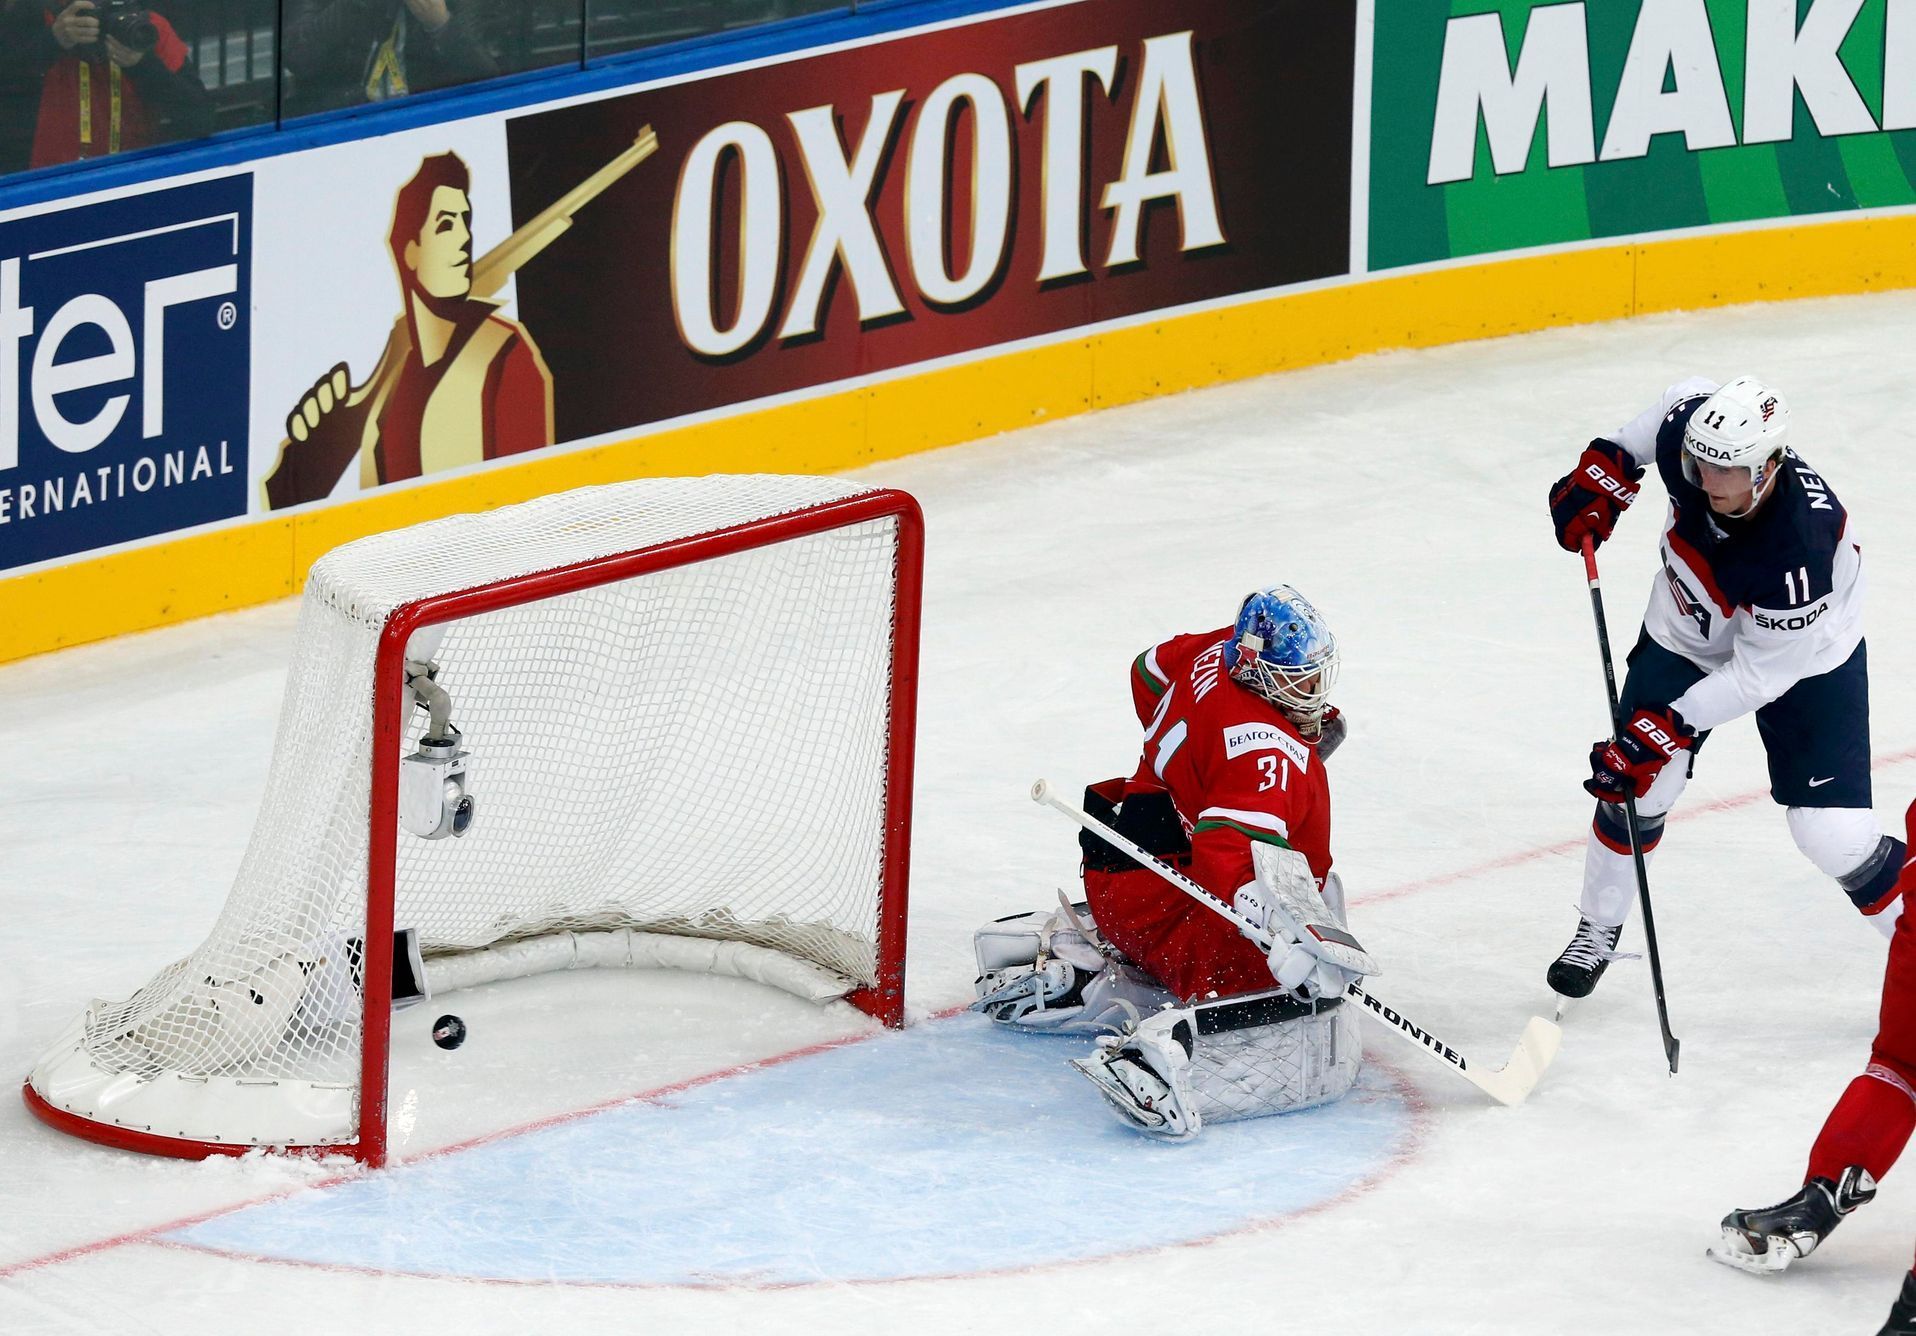 Nelson of the U.S. scores past by goalkeeper Mezin of Belarus during the first period of their men's ice hockey World Championship Group B game at Minsk Arena in Minsk